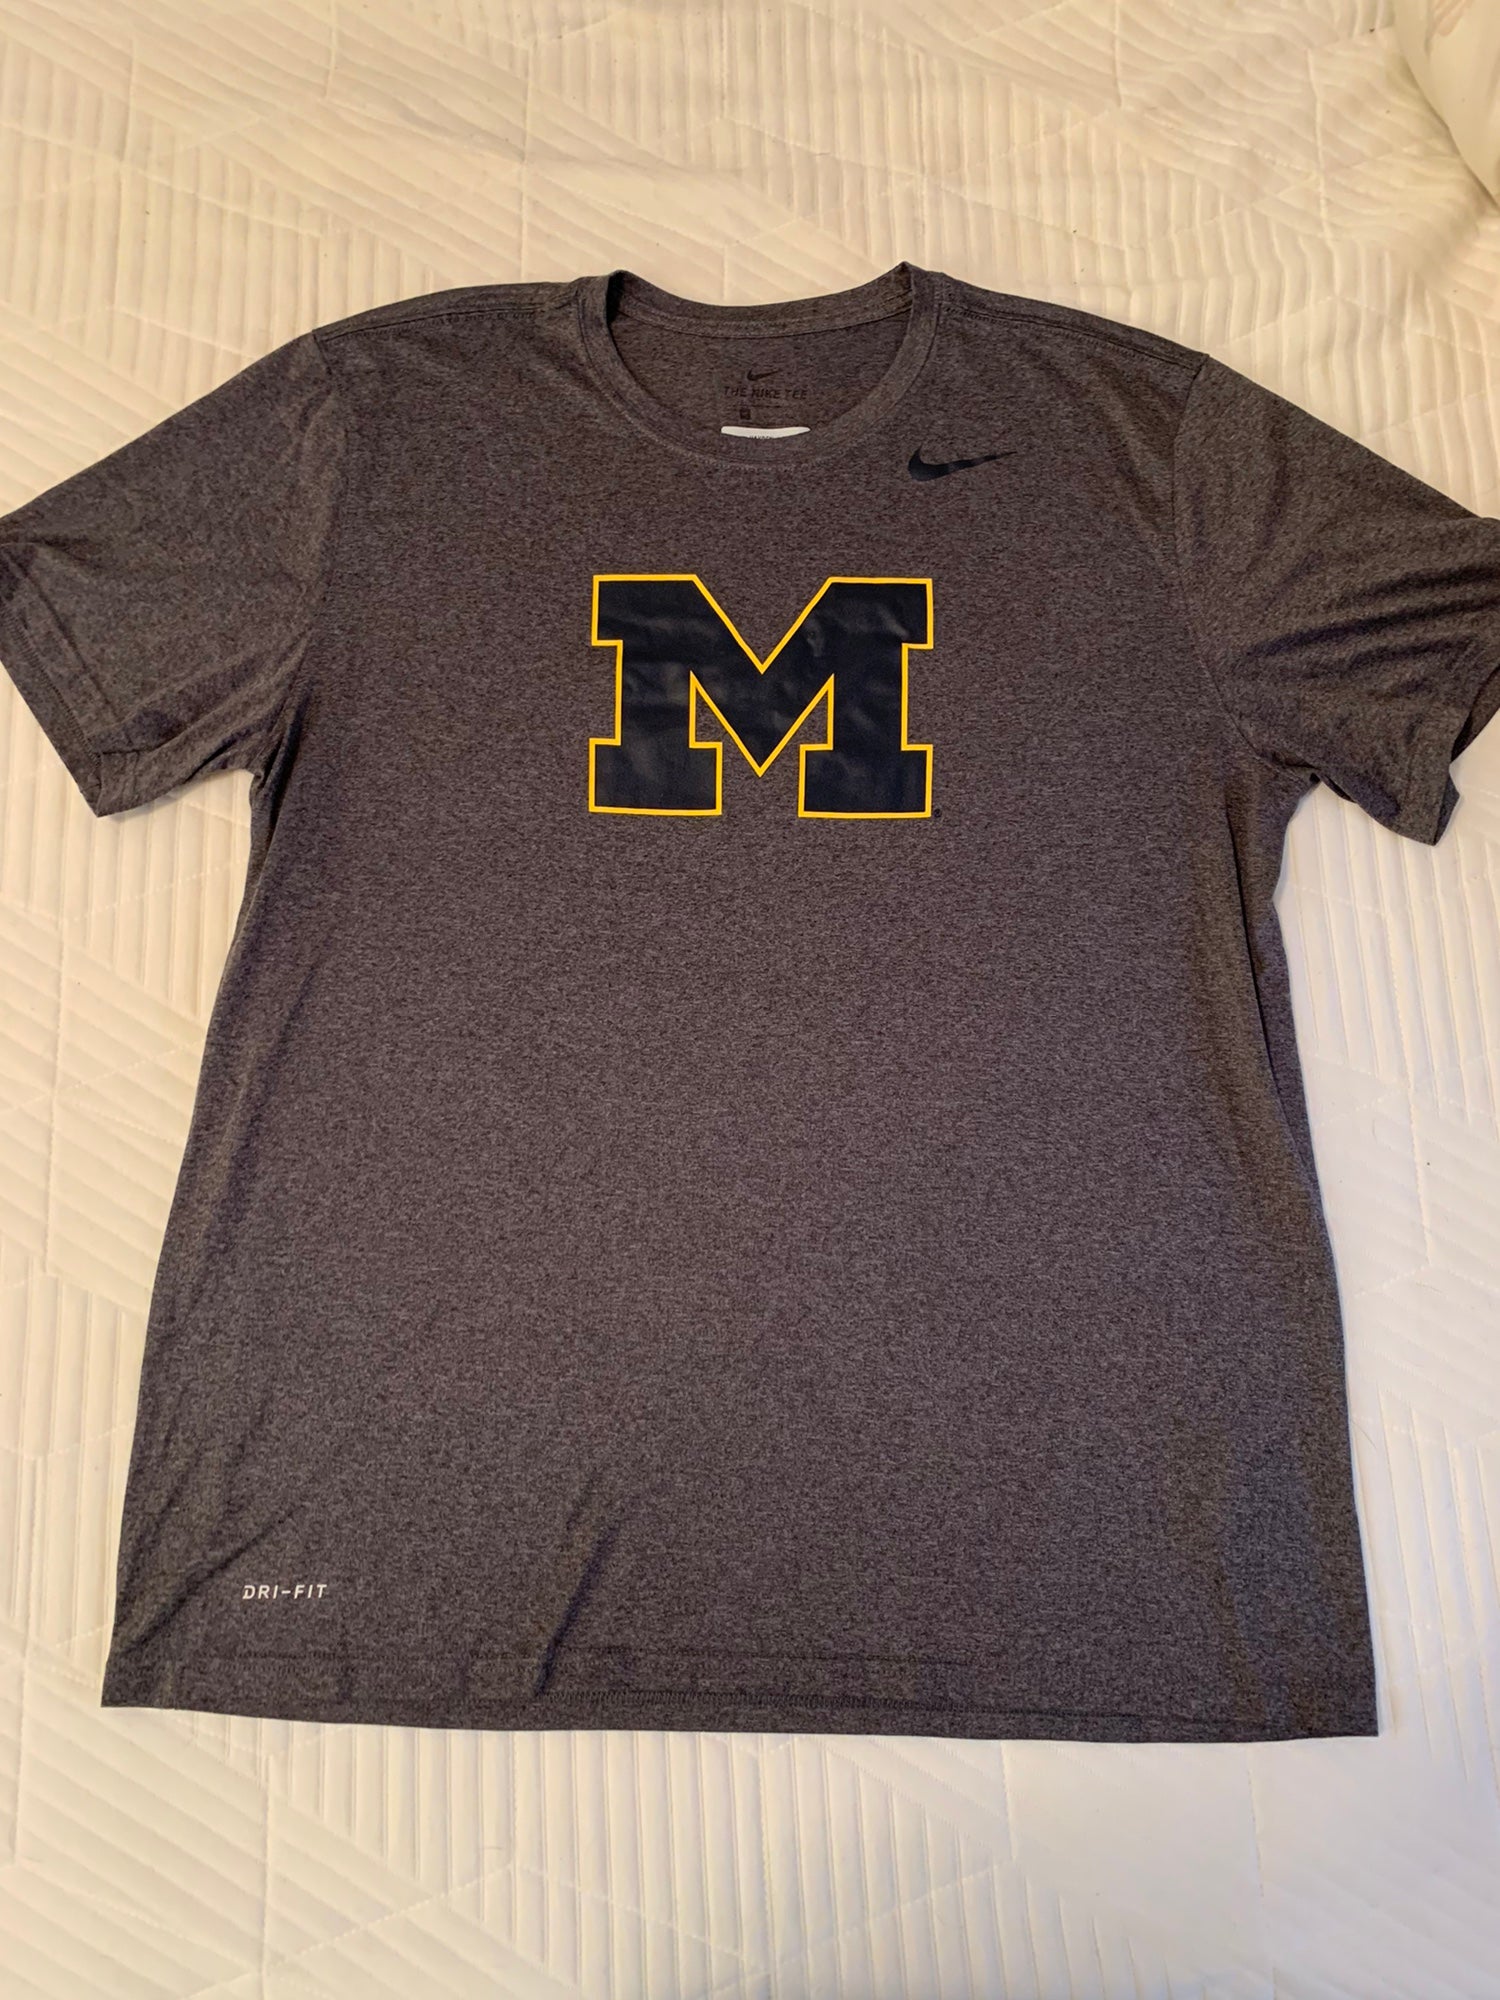 Hockey Shirts for sale | New and Used on SidelineSwap